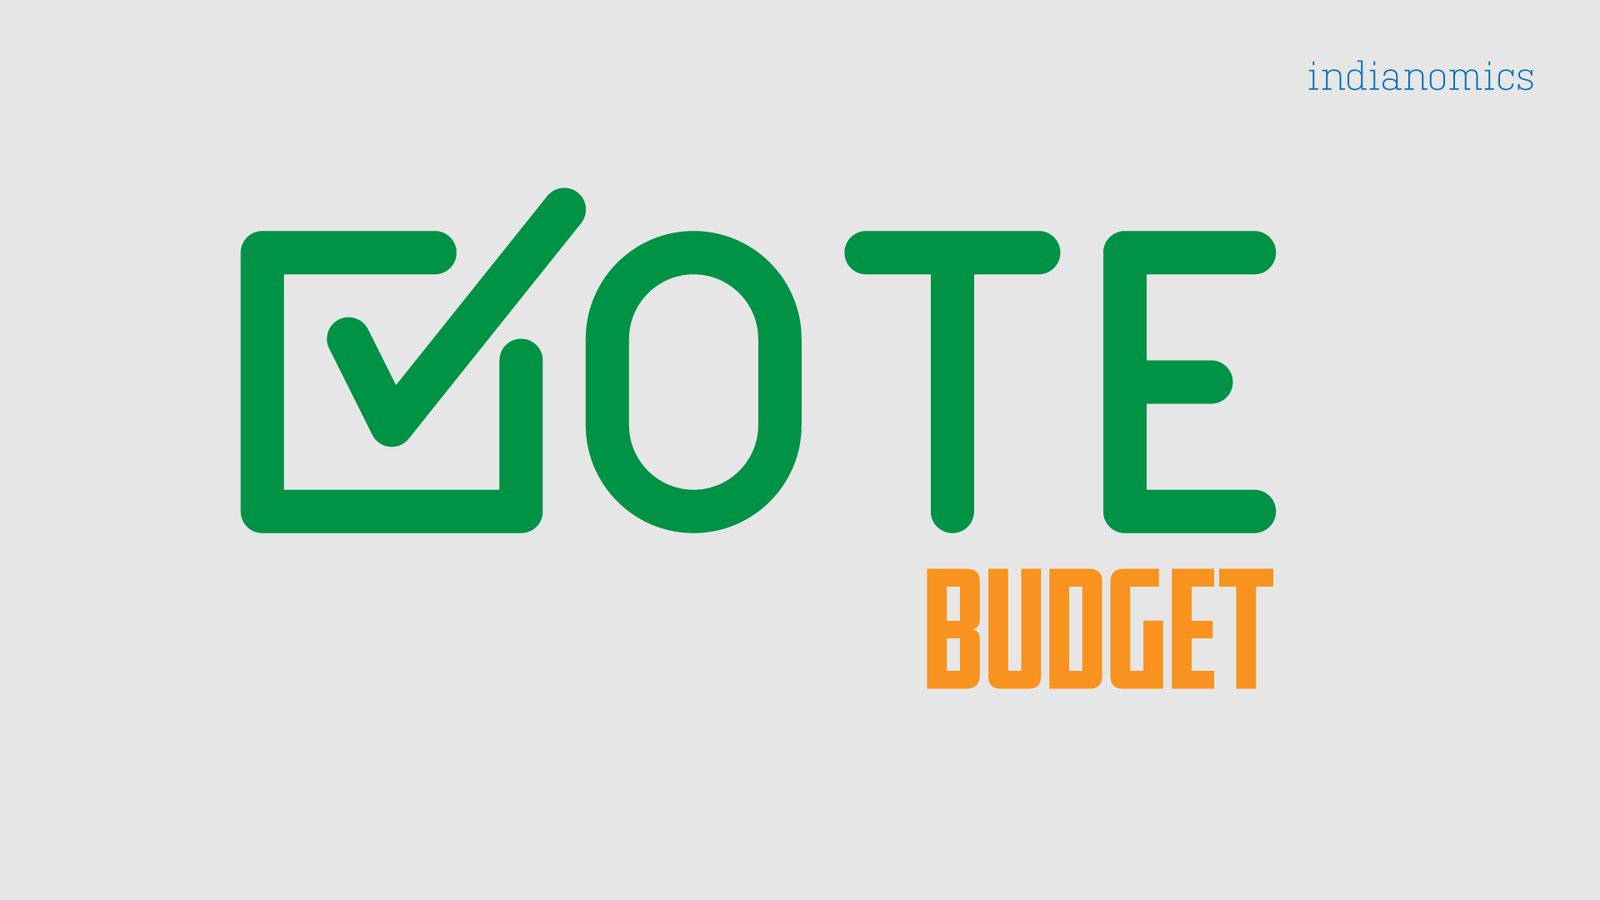 Vote Budget - Populist budget rolled out to favor ruling party in forthcoming elections